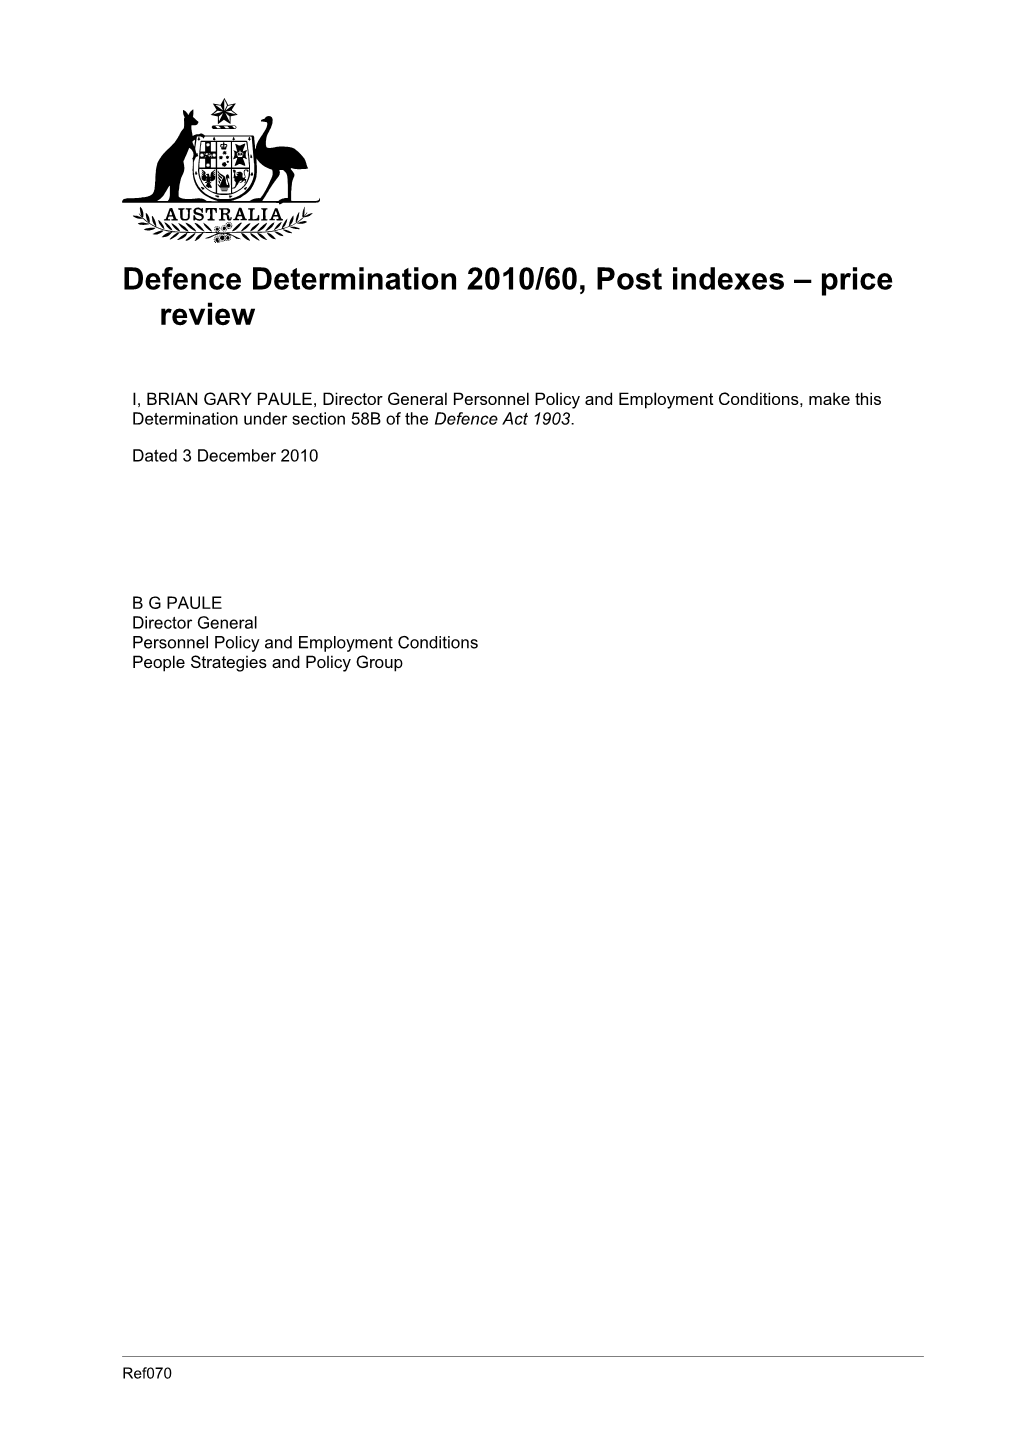 Defence Determination 2010/60, Post Indexes Price Review